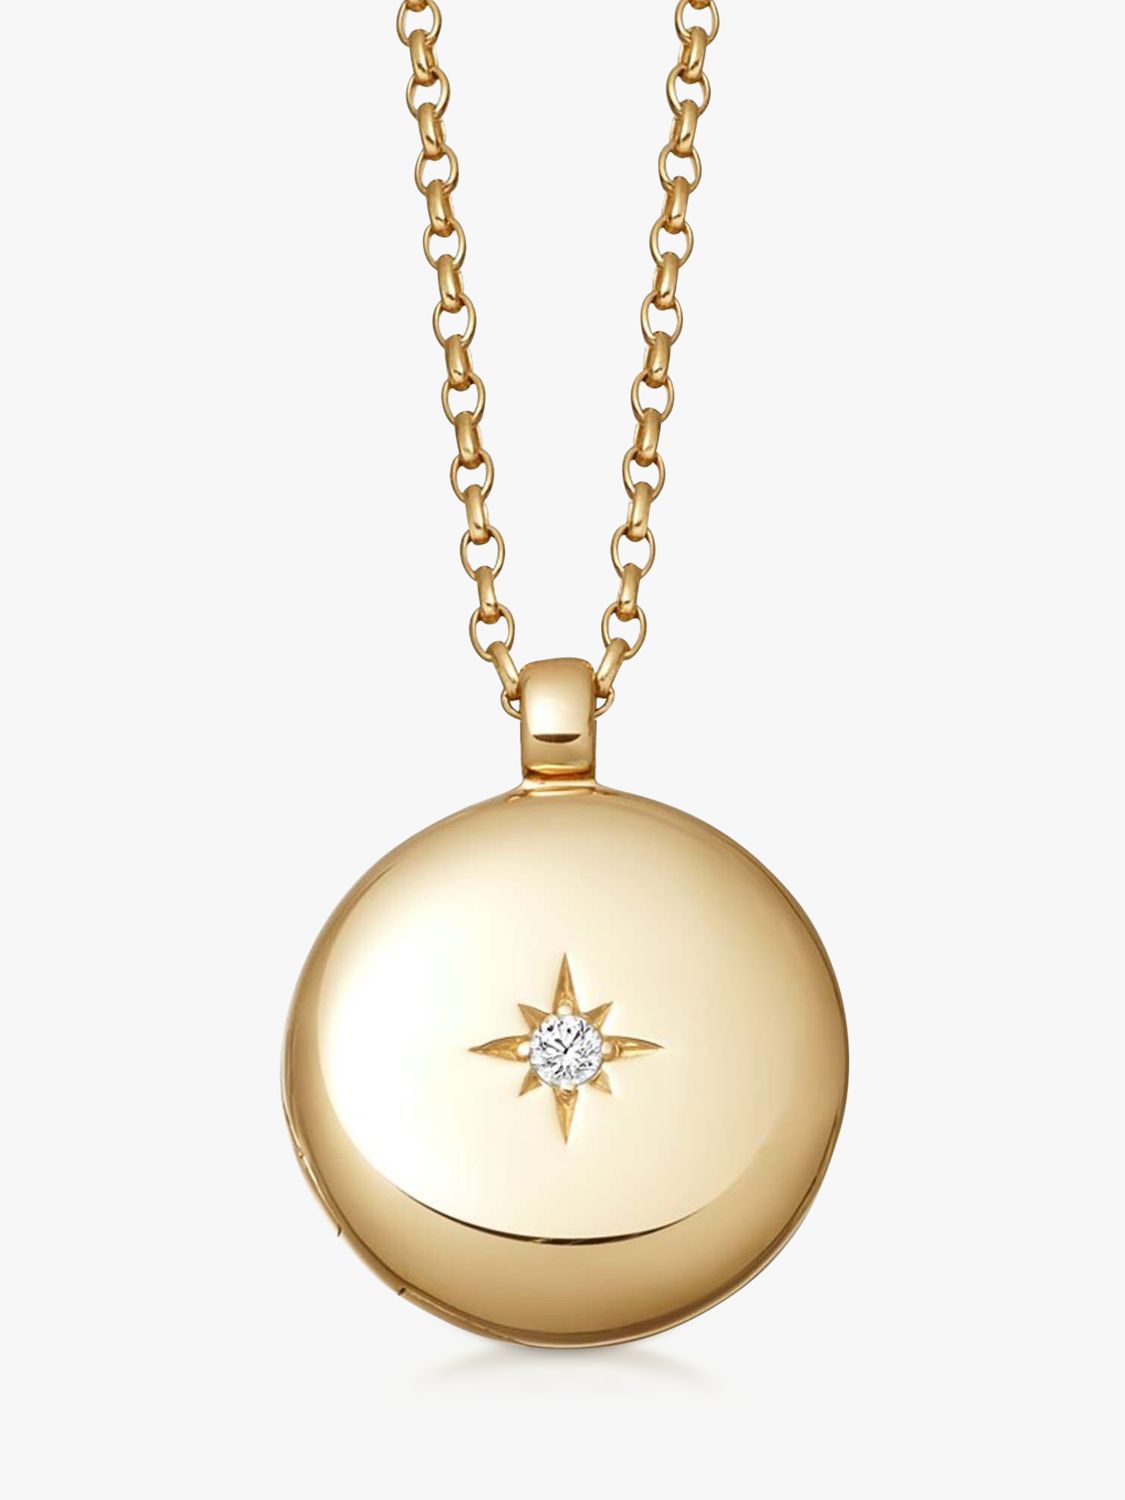 Buy Astley Clarke Biography White Sapphire Star Locket Long Pendant Necklace, Gold Online at johnlewis.com